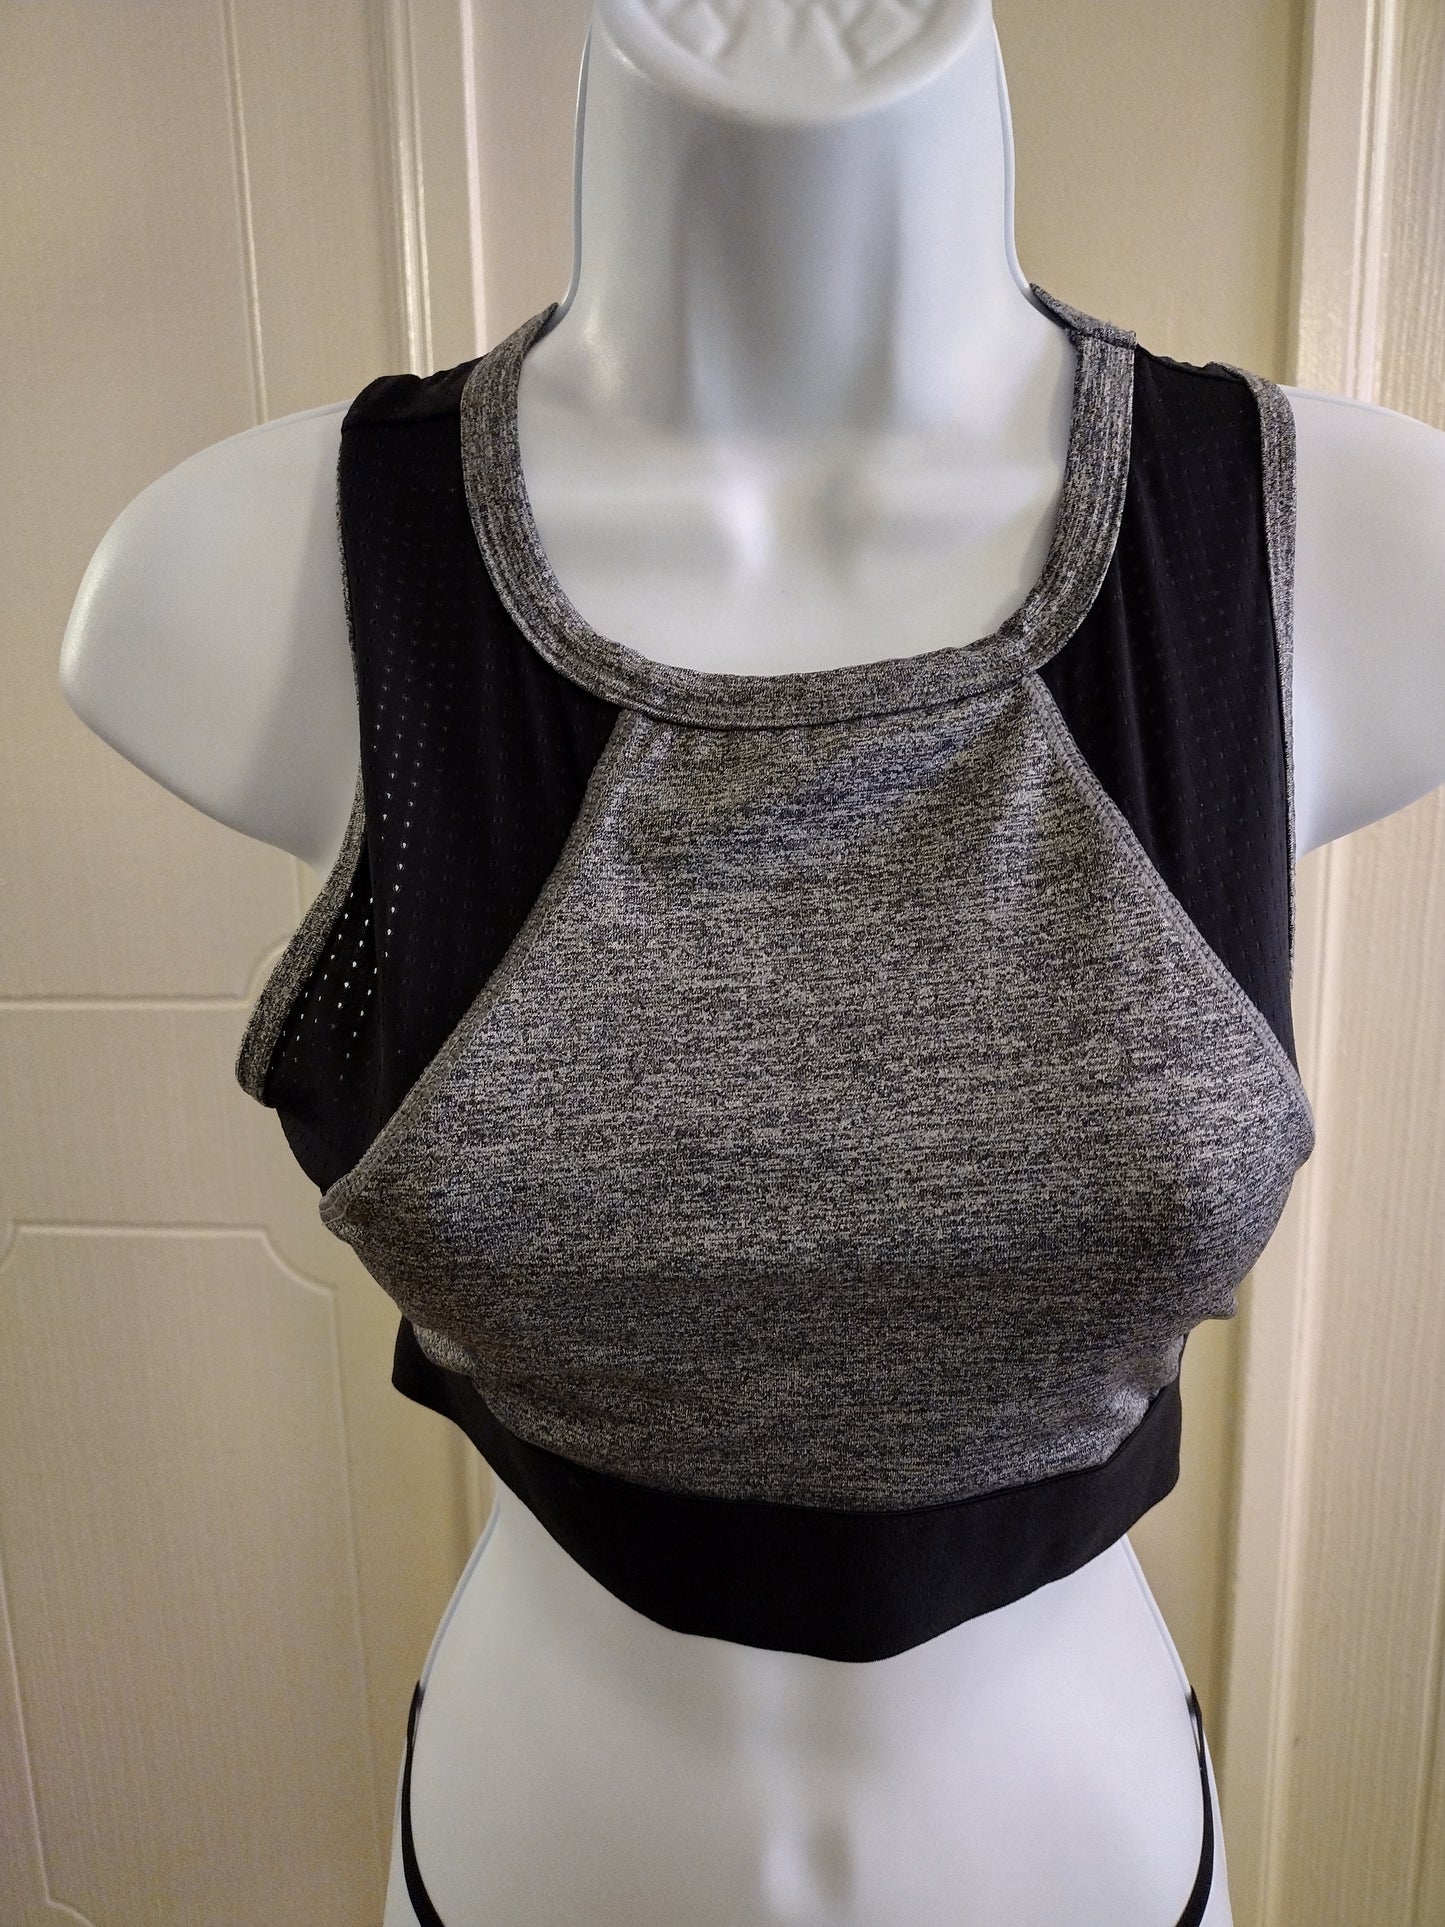 Forever 21 woman's sports bra